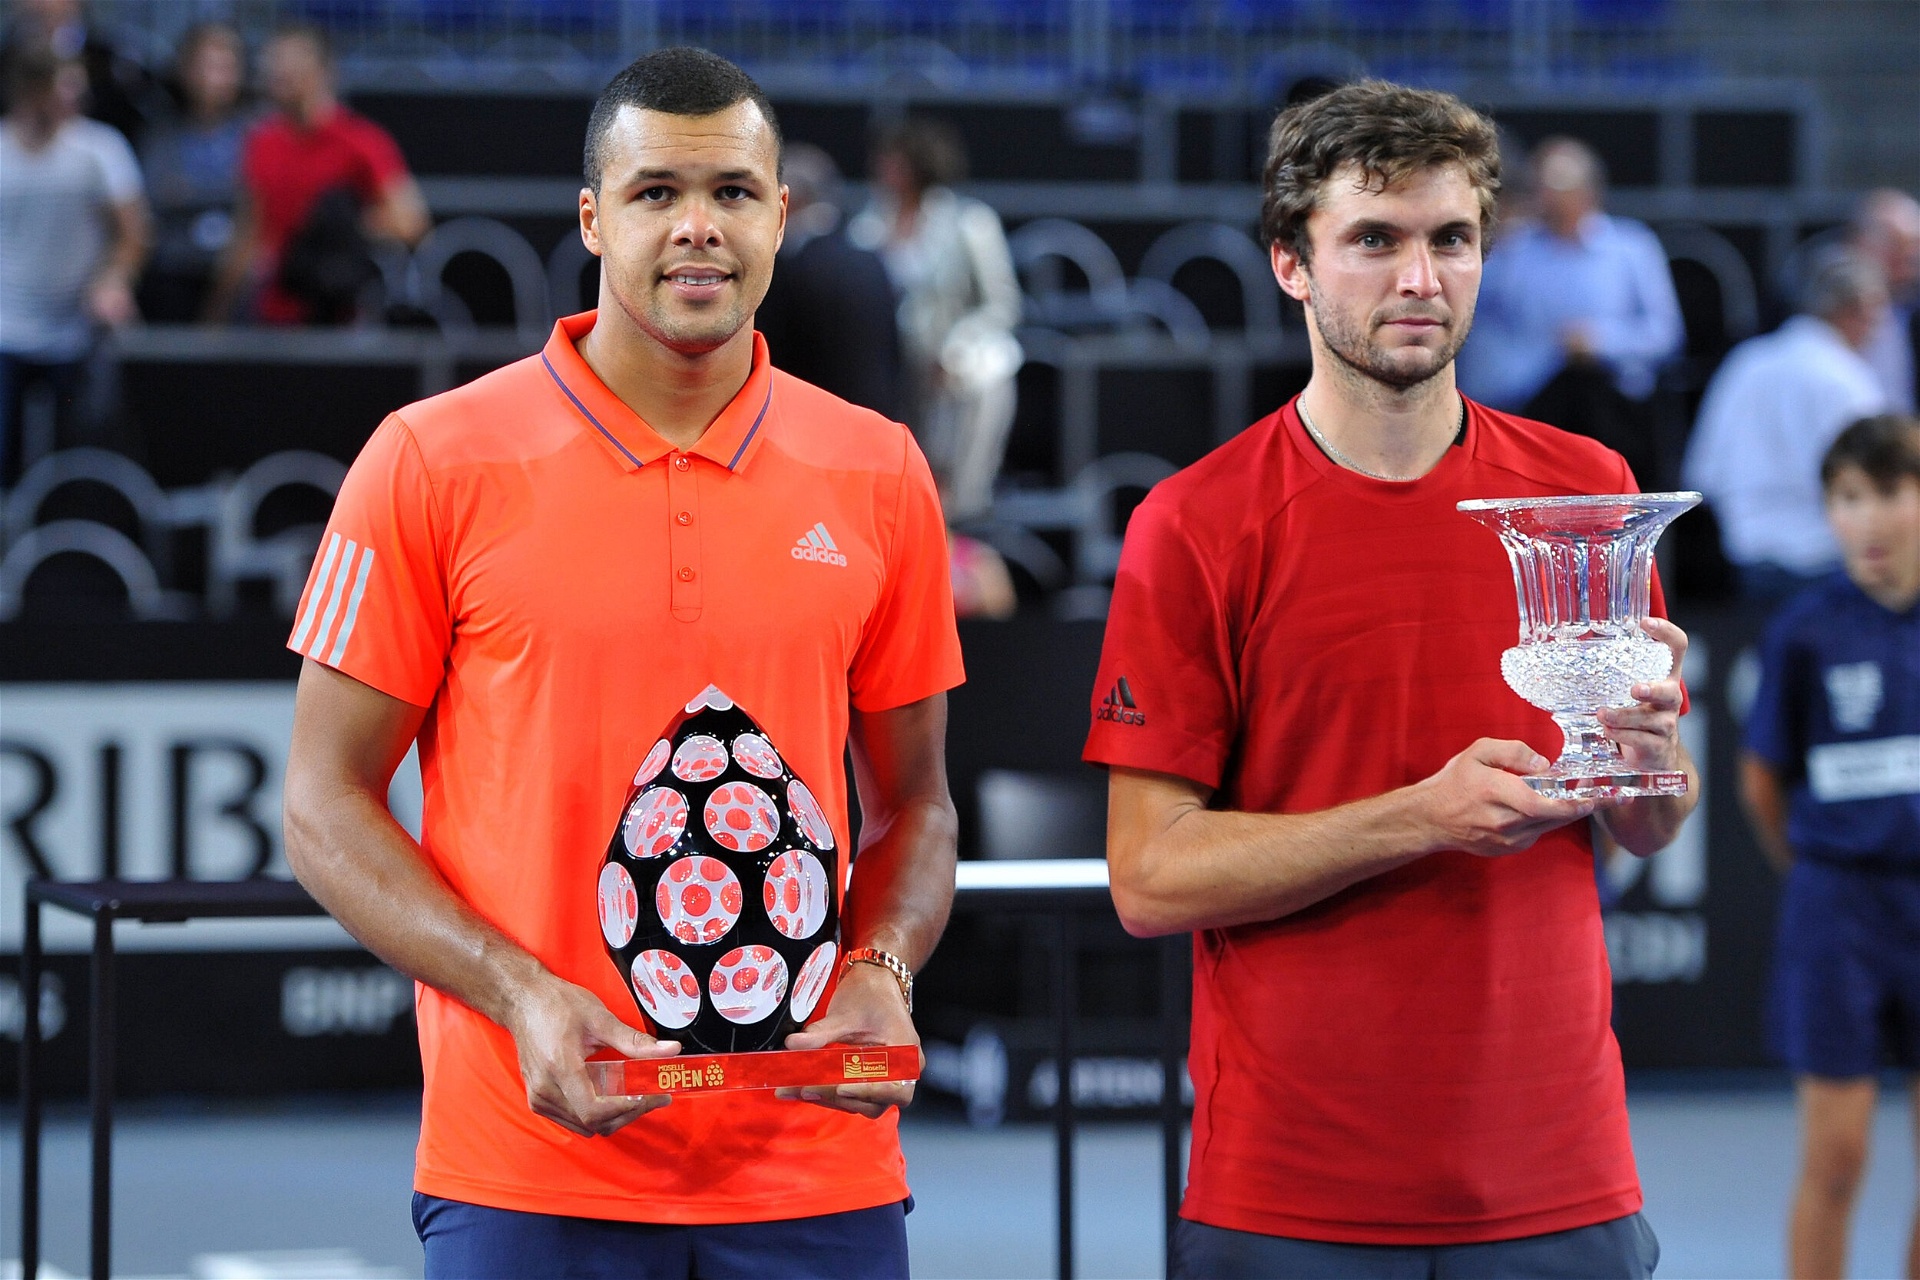 Jo Wilfried Tsonga and Gilles Simon at the Moselle Open in Metz in 2015